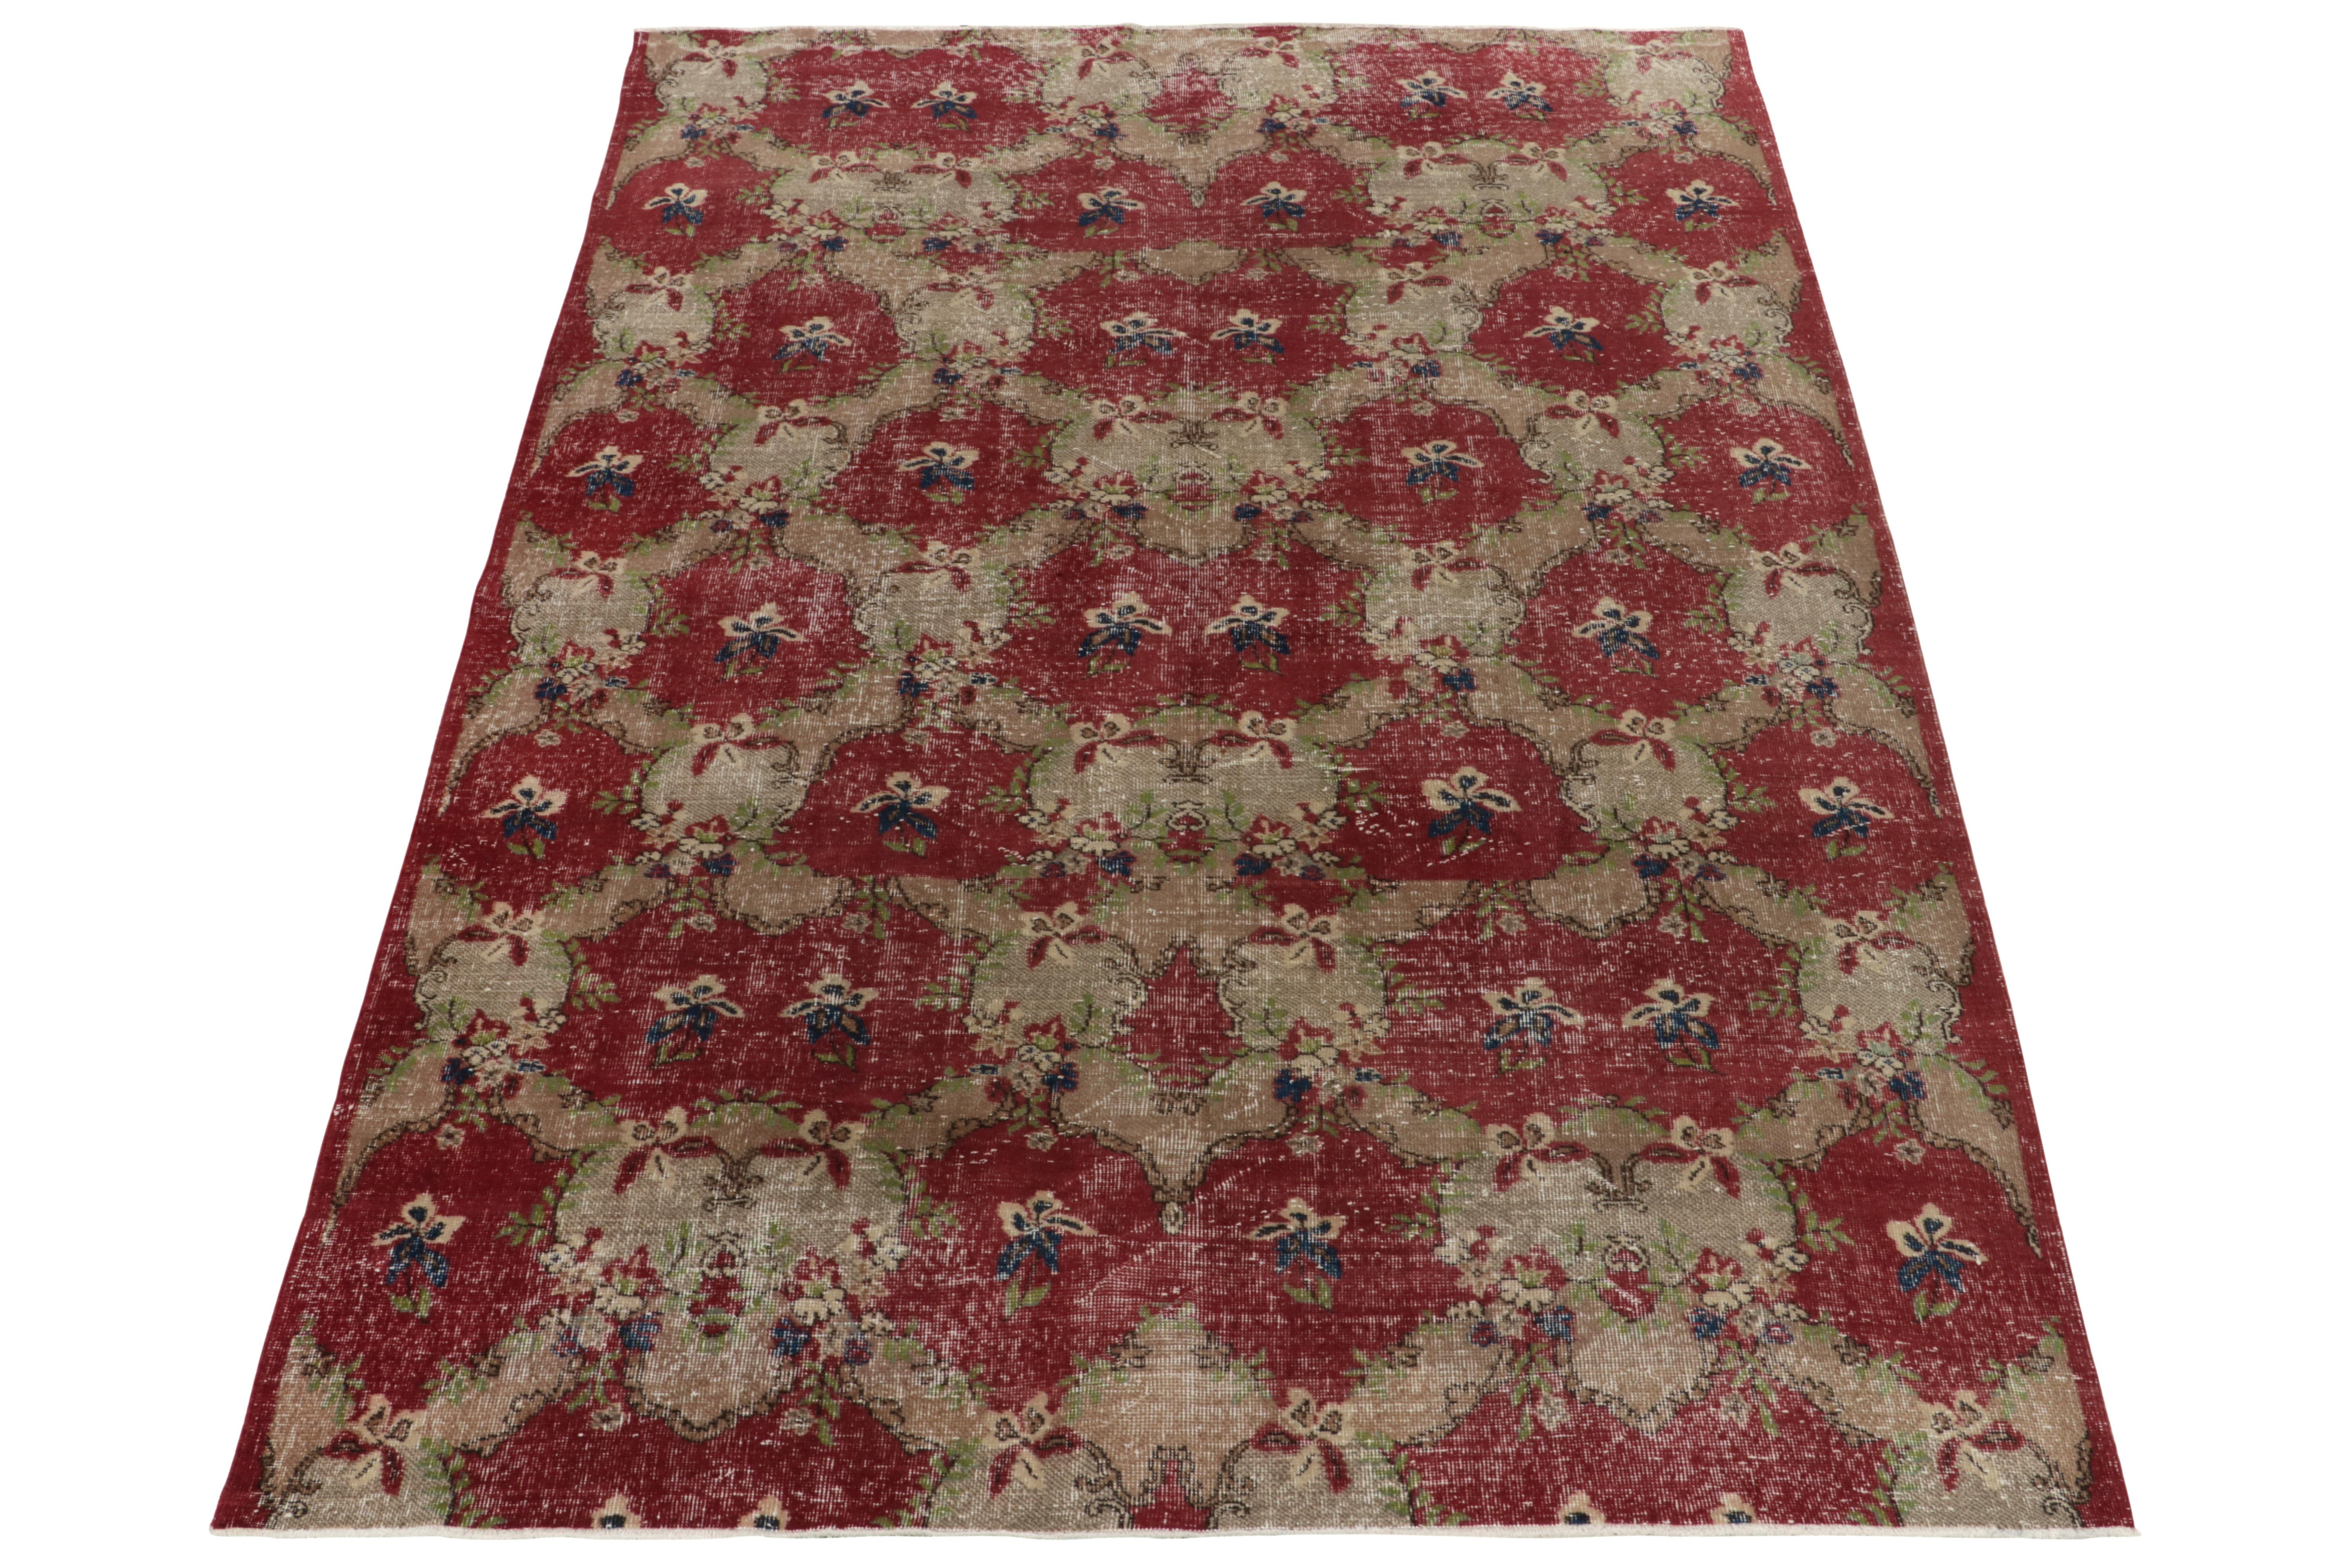 Hand-knotted in wool from Turkey circa 1960-1970, a vintage 7x10 mid-century modern rug joining Rug & Kilim’s commemorative Mid-Century Pasha Collection. 

The piece sits fabulously in velvet red against beige-brown with kisses of green for an